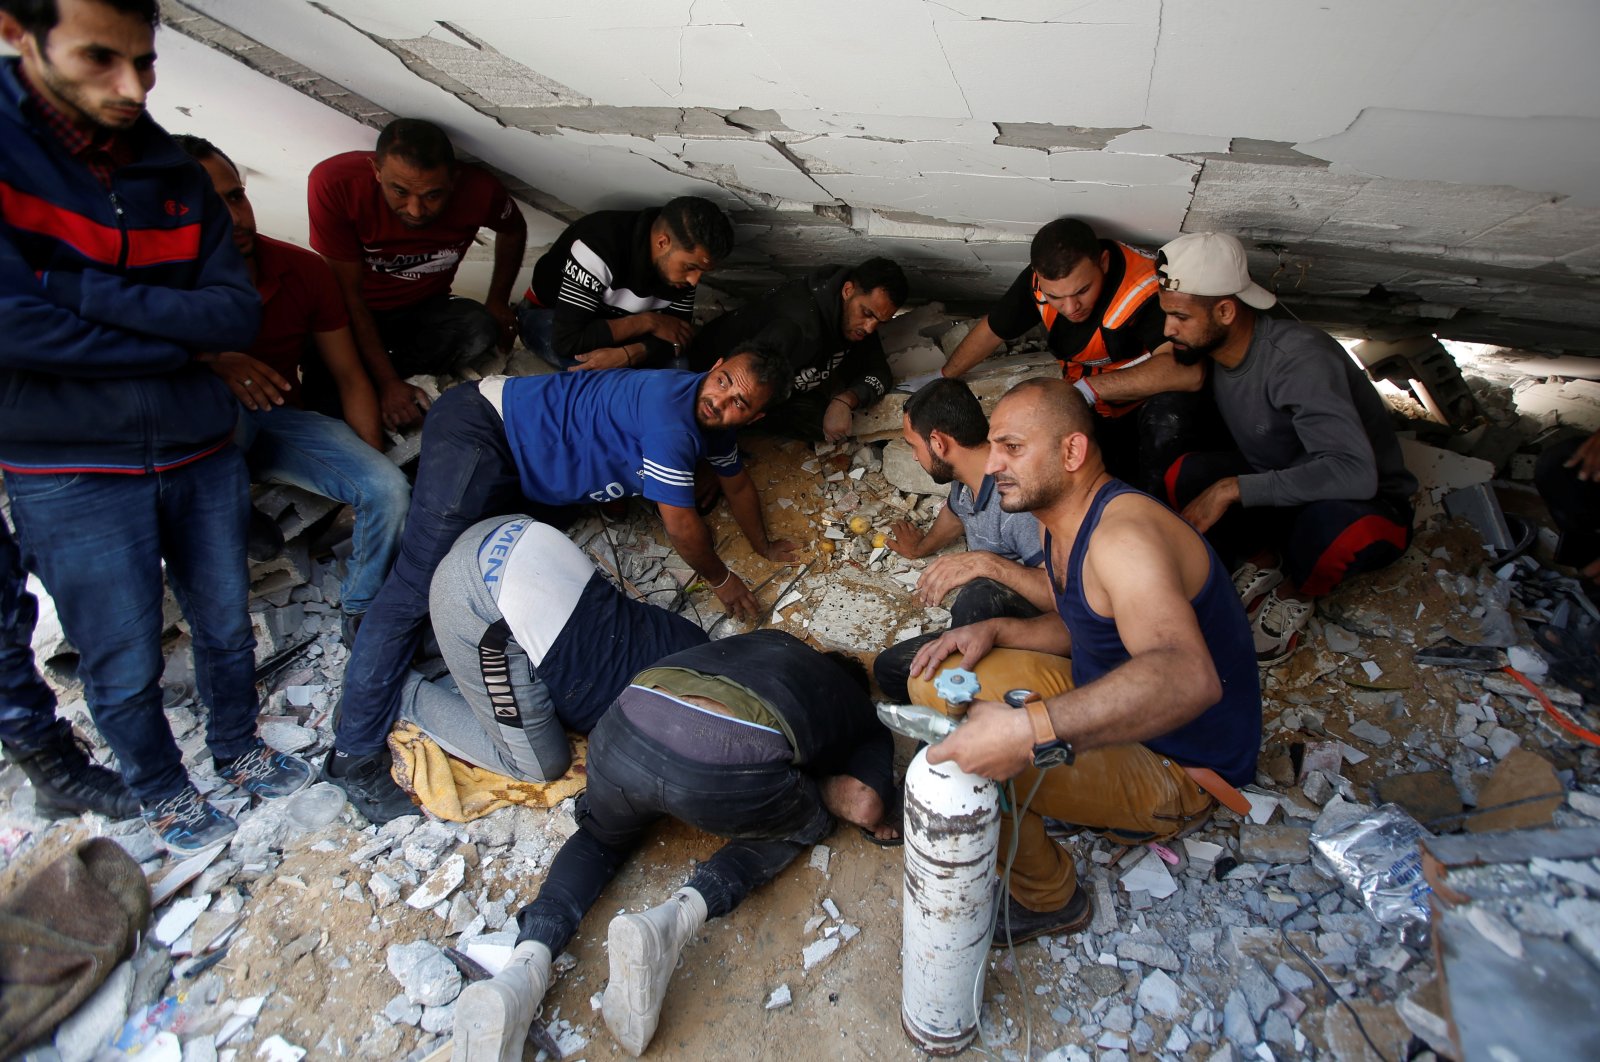 Rescuers search for people in the rubble of a building at the site of Israeli airstrikes, in Gaza City, May 16, 2021. (Reuters Photo)